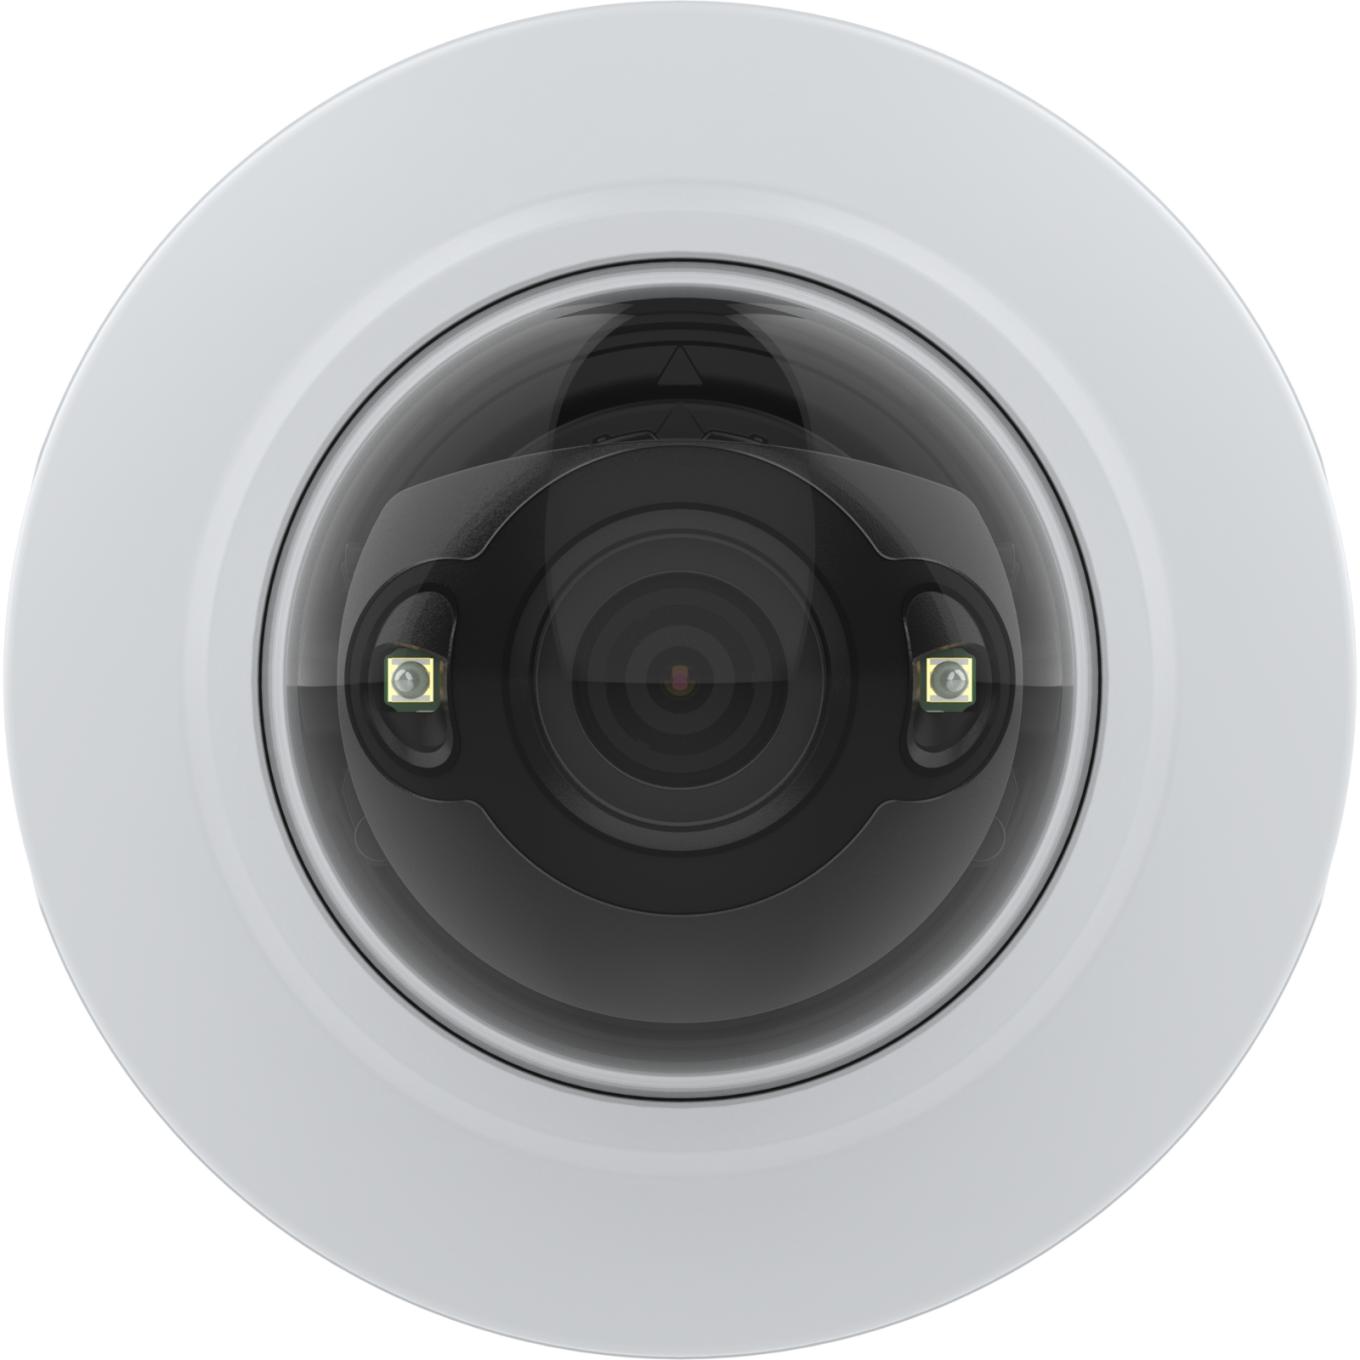 AXIS M4218-LV Dome Camera、壁面設置、正面から見た図